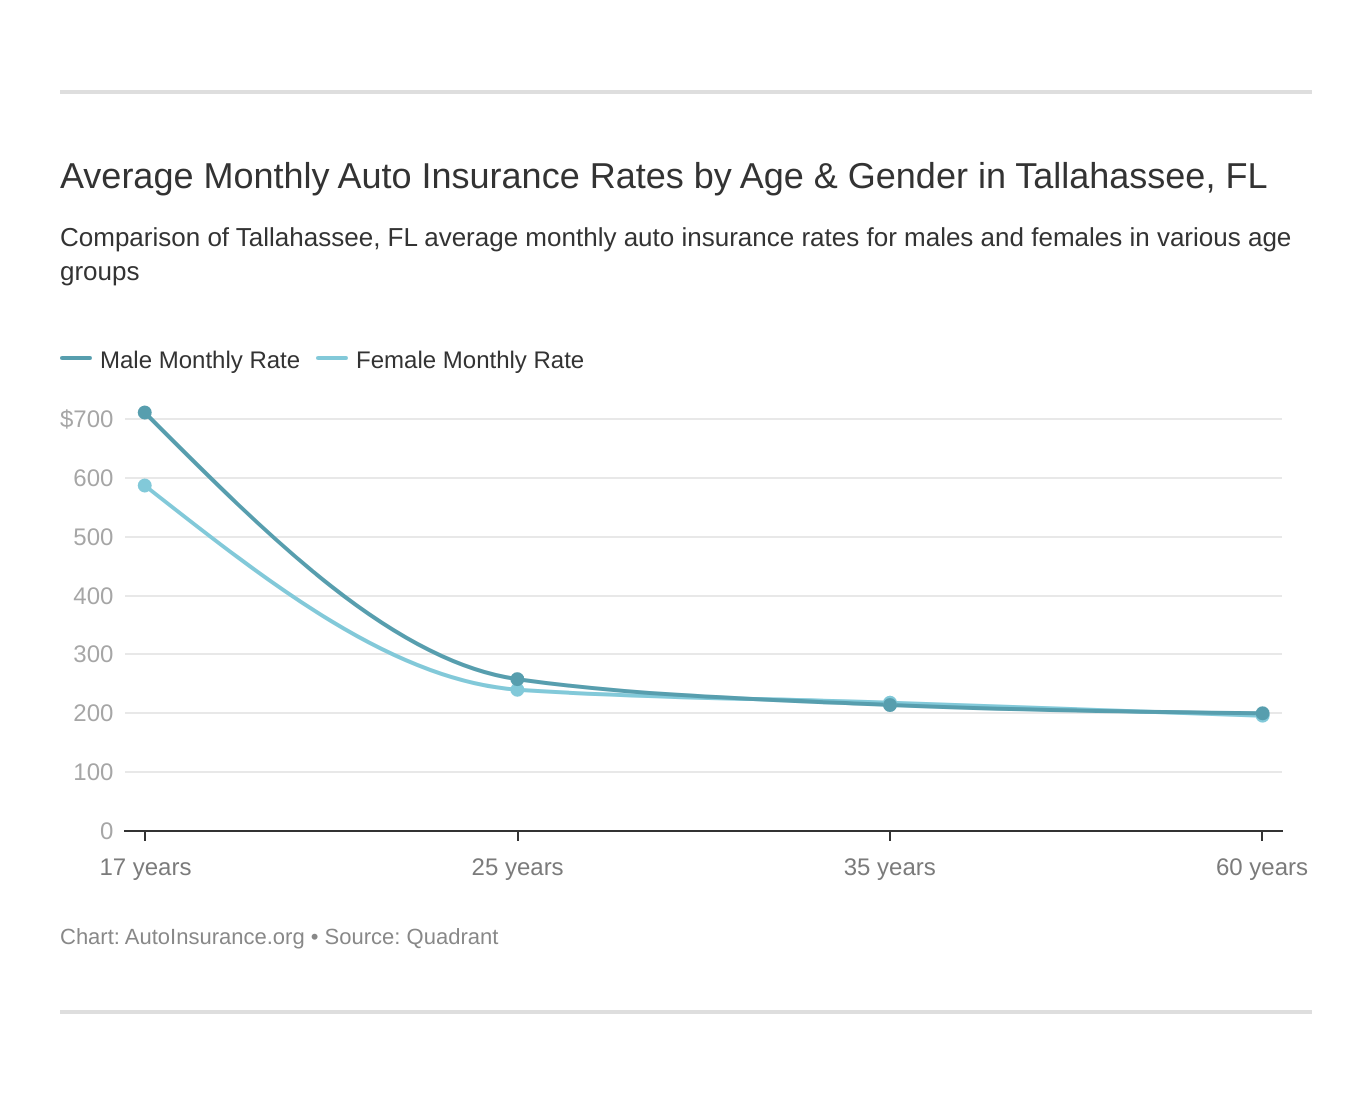 Average Monthly Auto Insurance Rates by Age & Gender in Tallahassee, FL